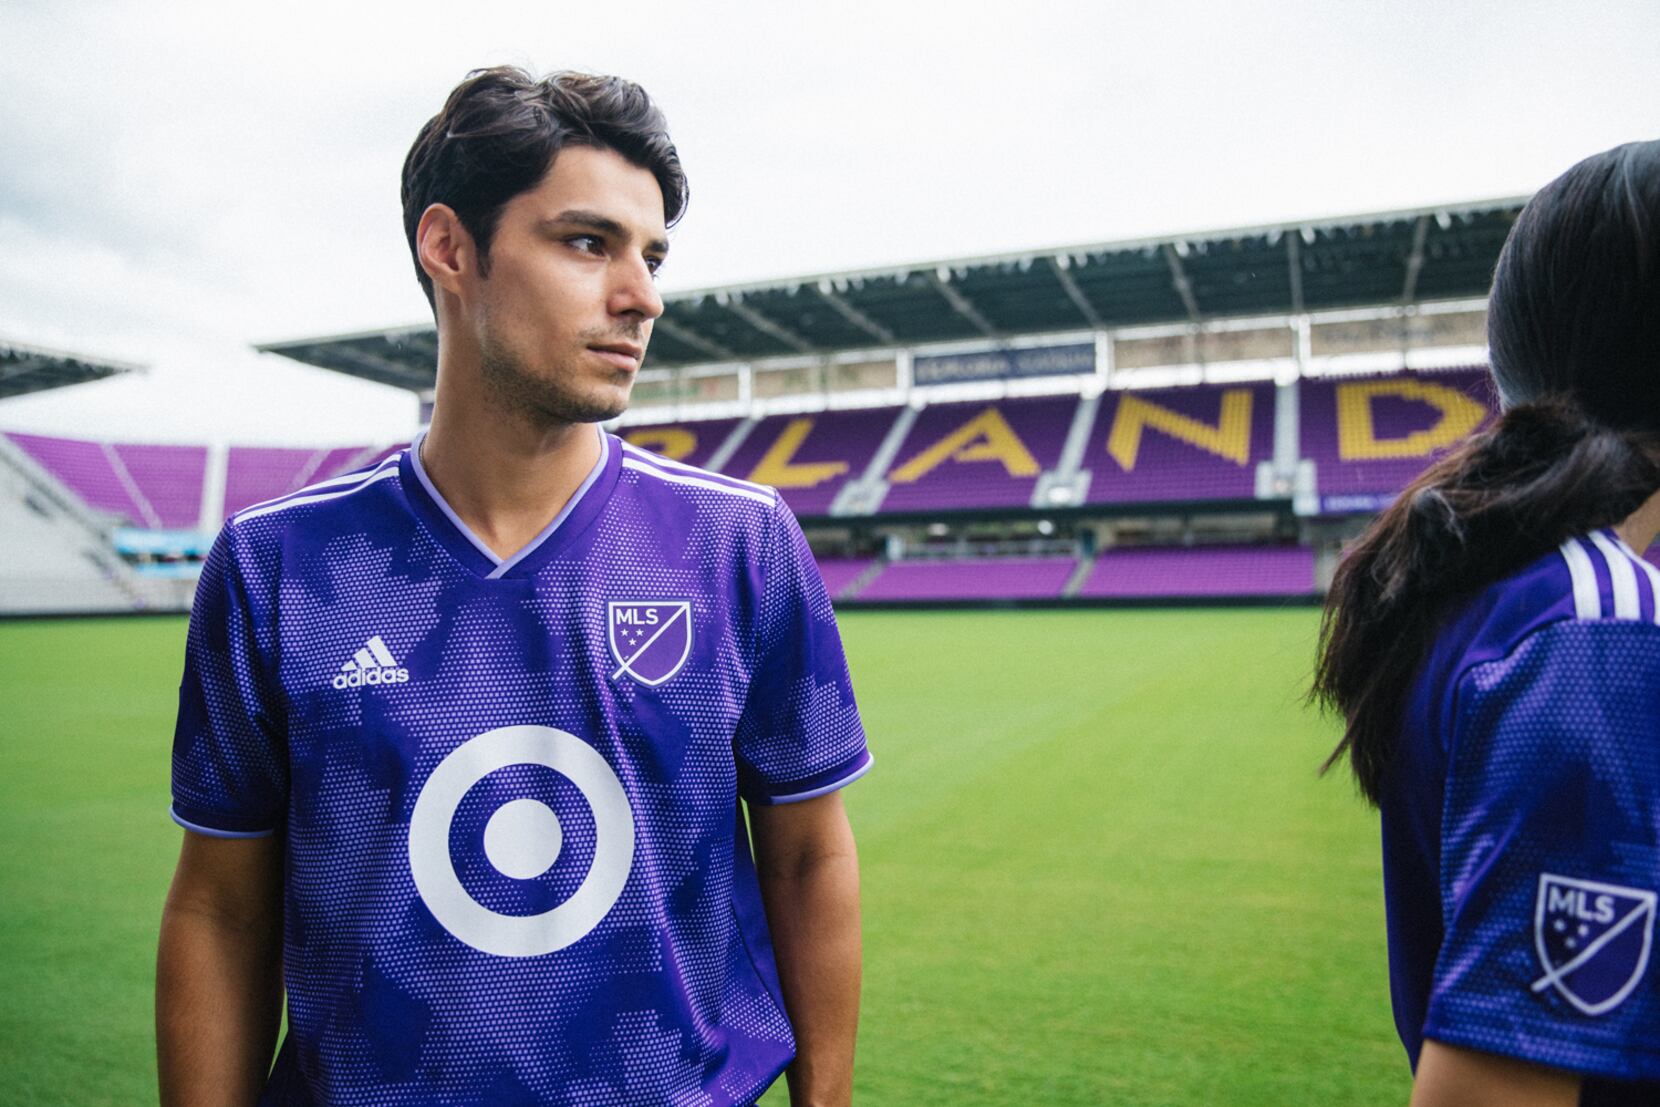 MLS, adidas unveil Orlando-inspired All-Star jersey, match ball for 2019